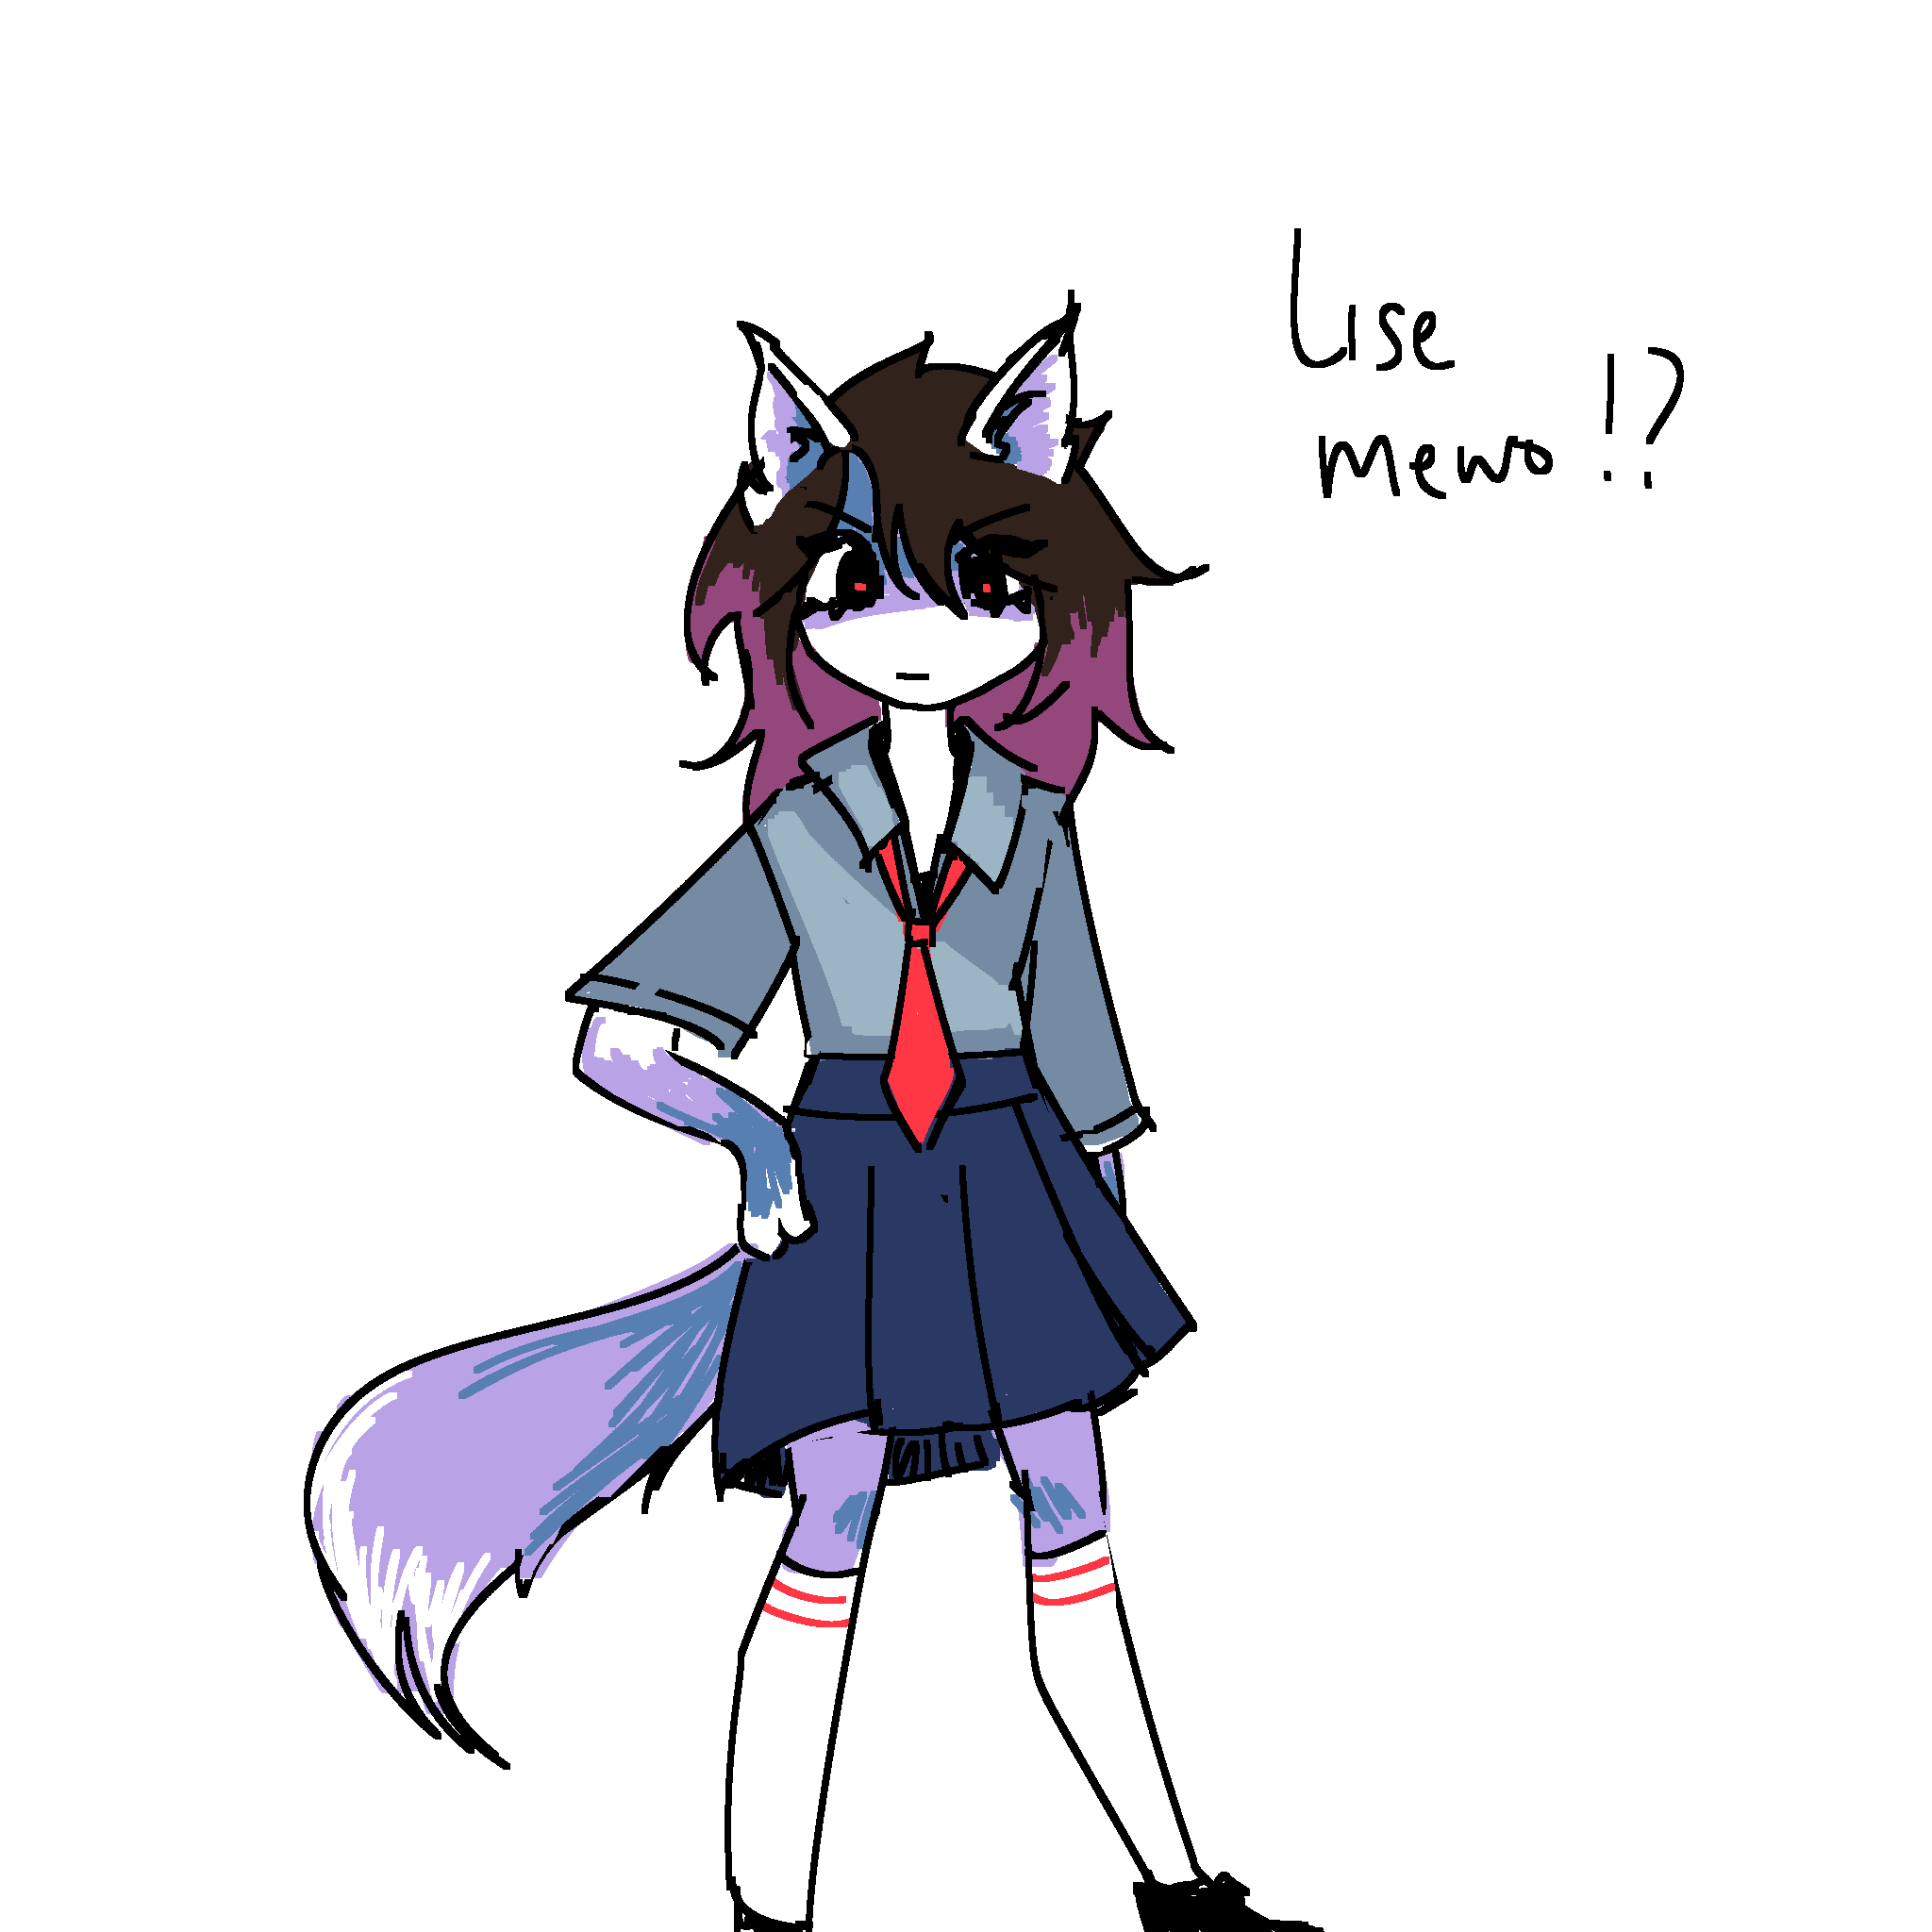 my fursona in a grey button down shirt, a loose red tie, a long navy blue knee length skirt, knee high white socks, and black shoes. she has an arm at her hip, and is in general looking a smidgem mad. there is text on the side that says 'Lise Mewo!?'